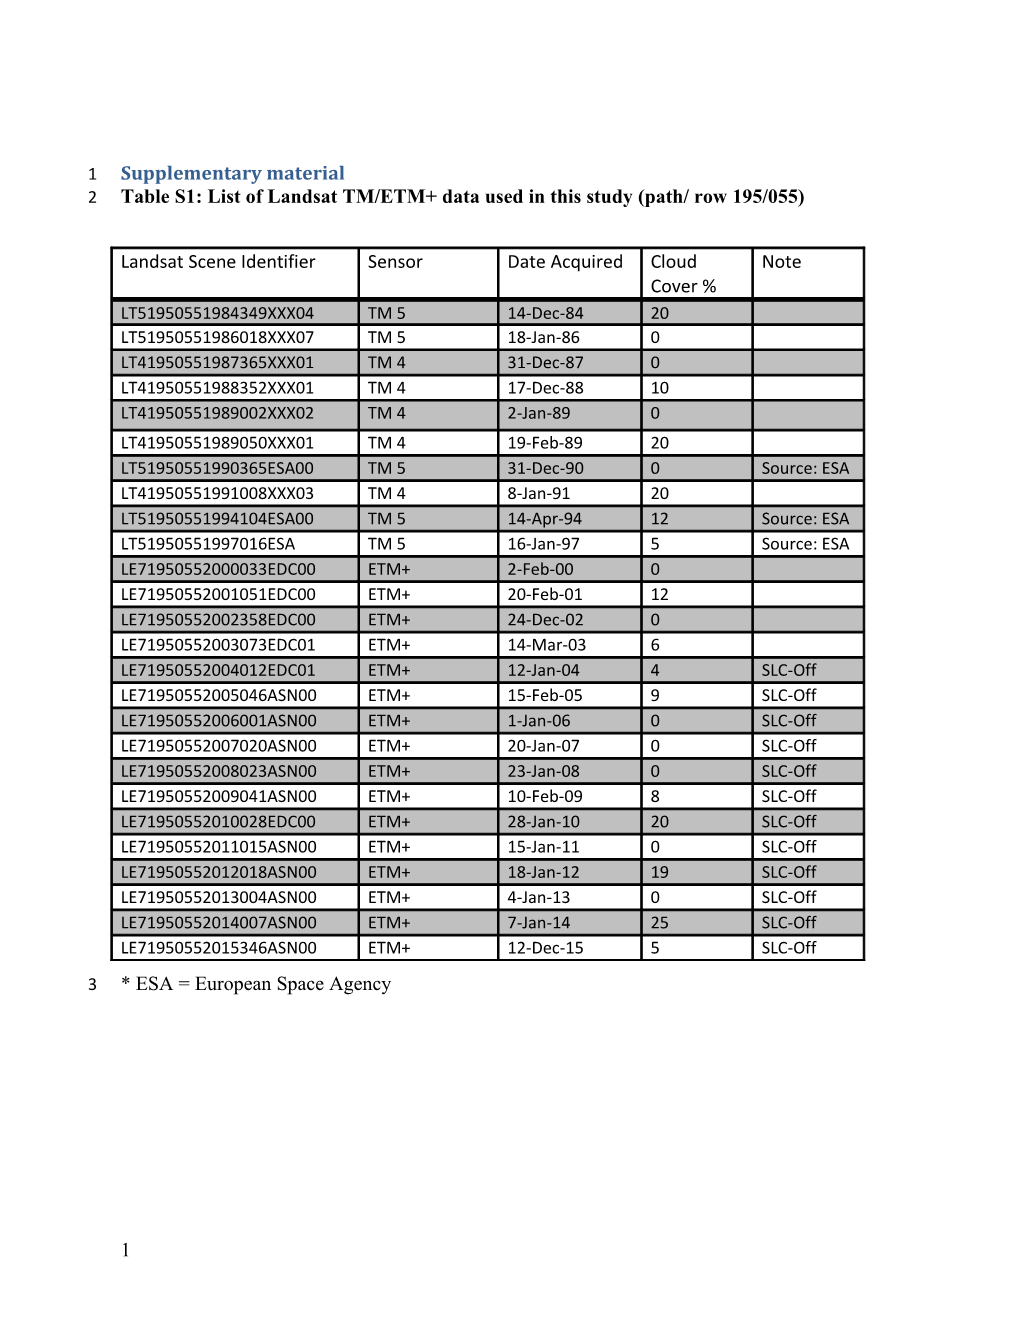 Table S1: List of Landsat TM/ETM+ Data Used in This Study (Path/ Row 195/055)